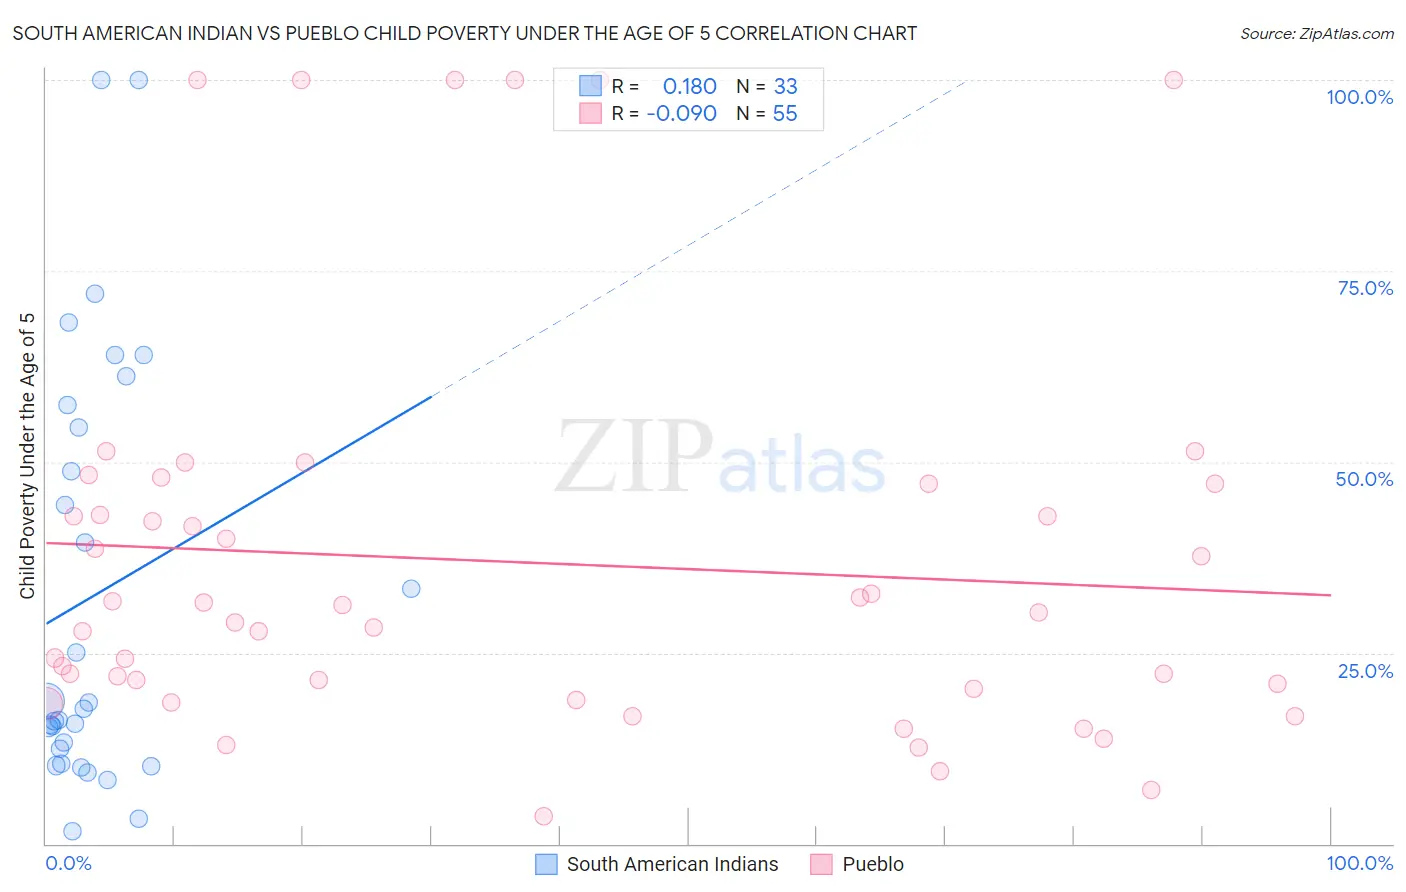 South American Indian vs Pueblo Child Poverty Under the Age of 5